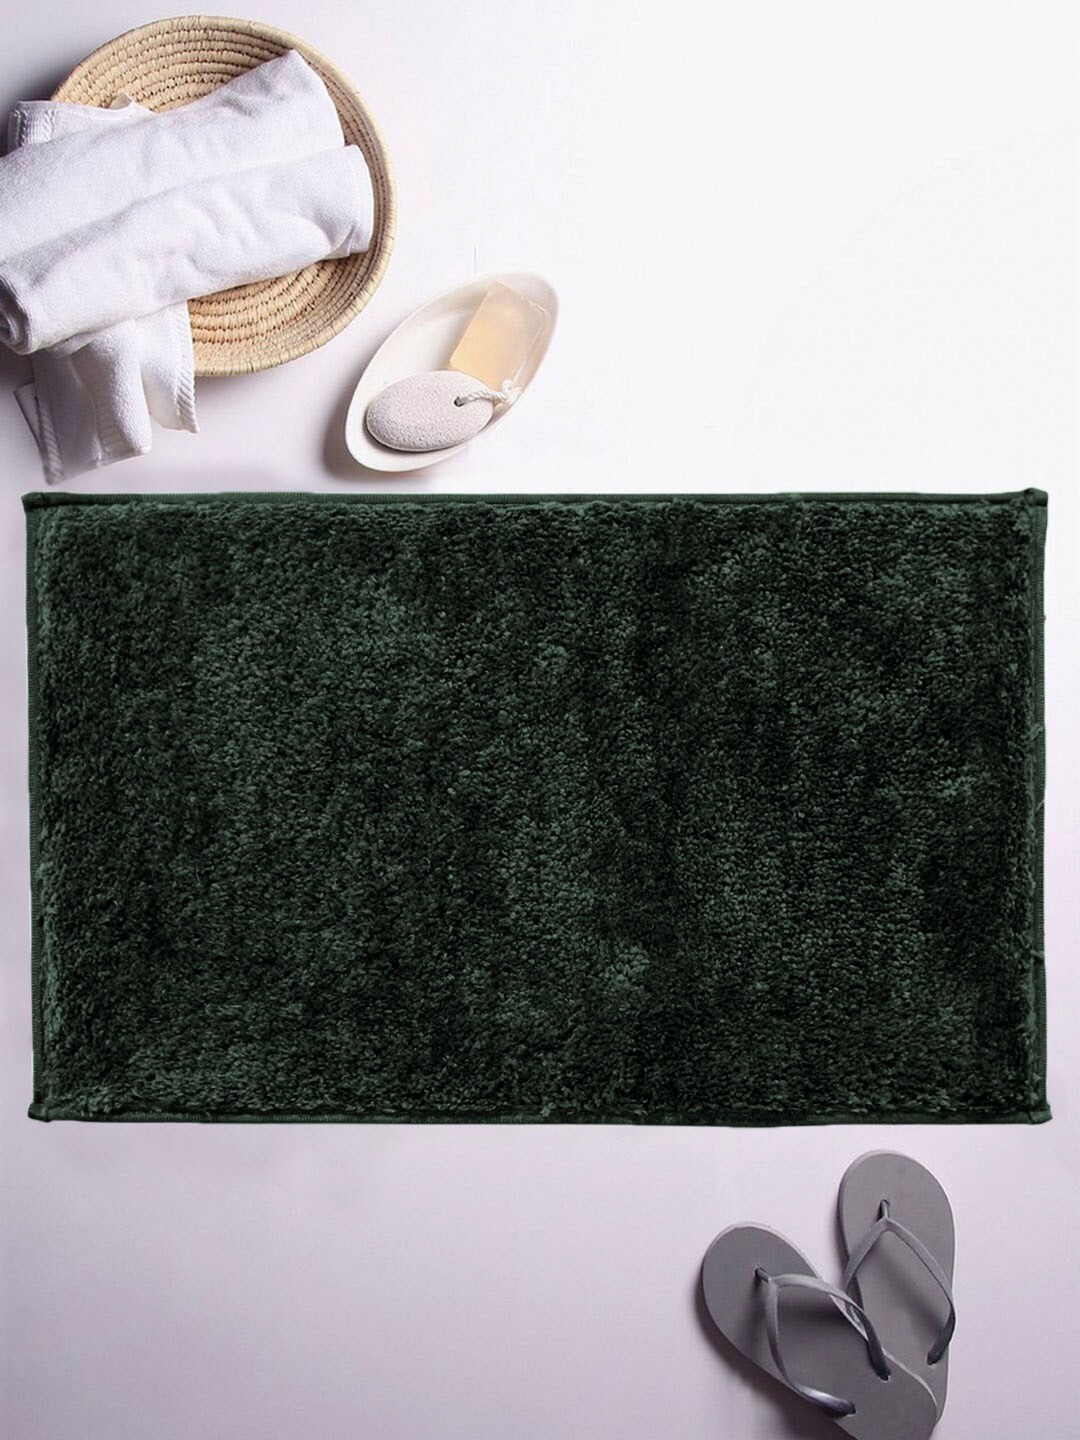 LUXEHOME INTERNATIONAL Green Solid 2200 GSM Anti-Skid Bath Rug Price in India